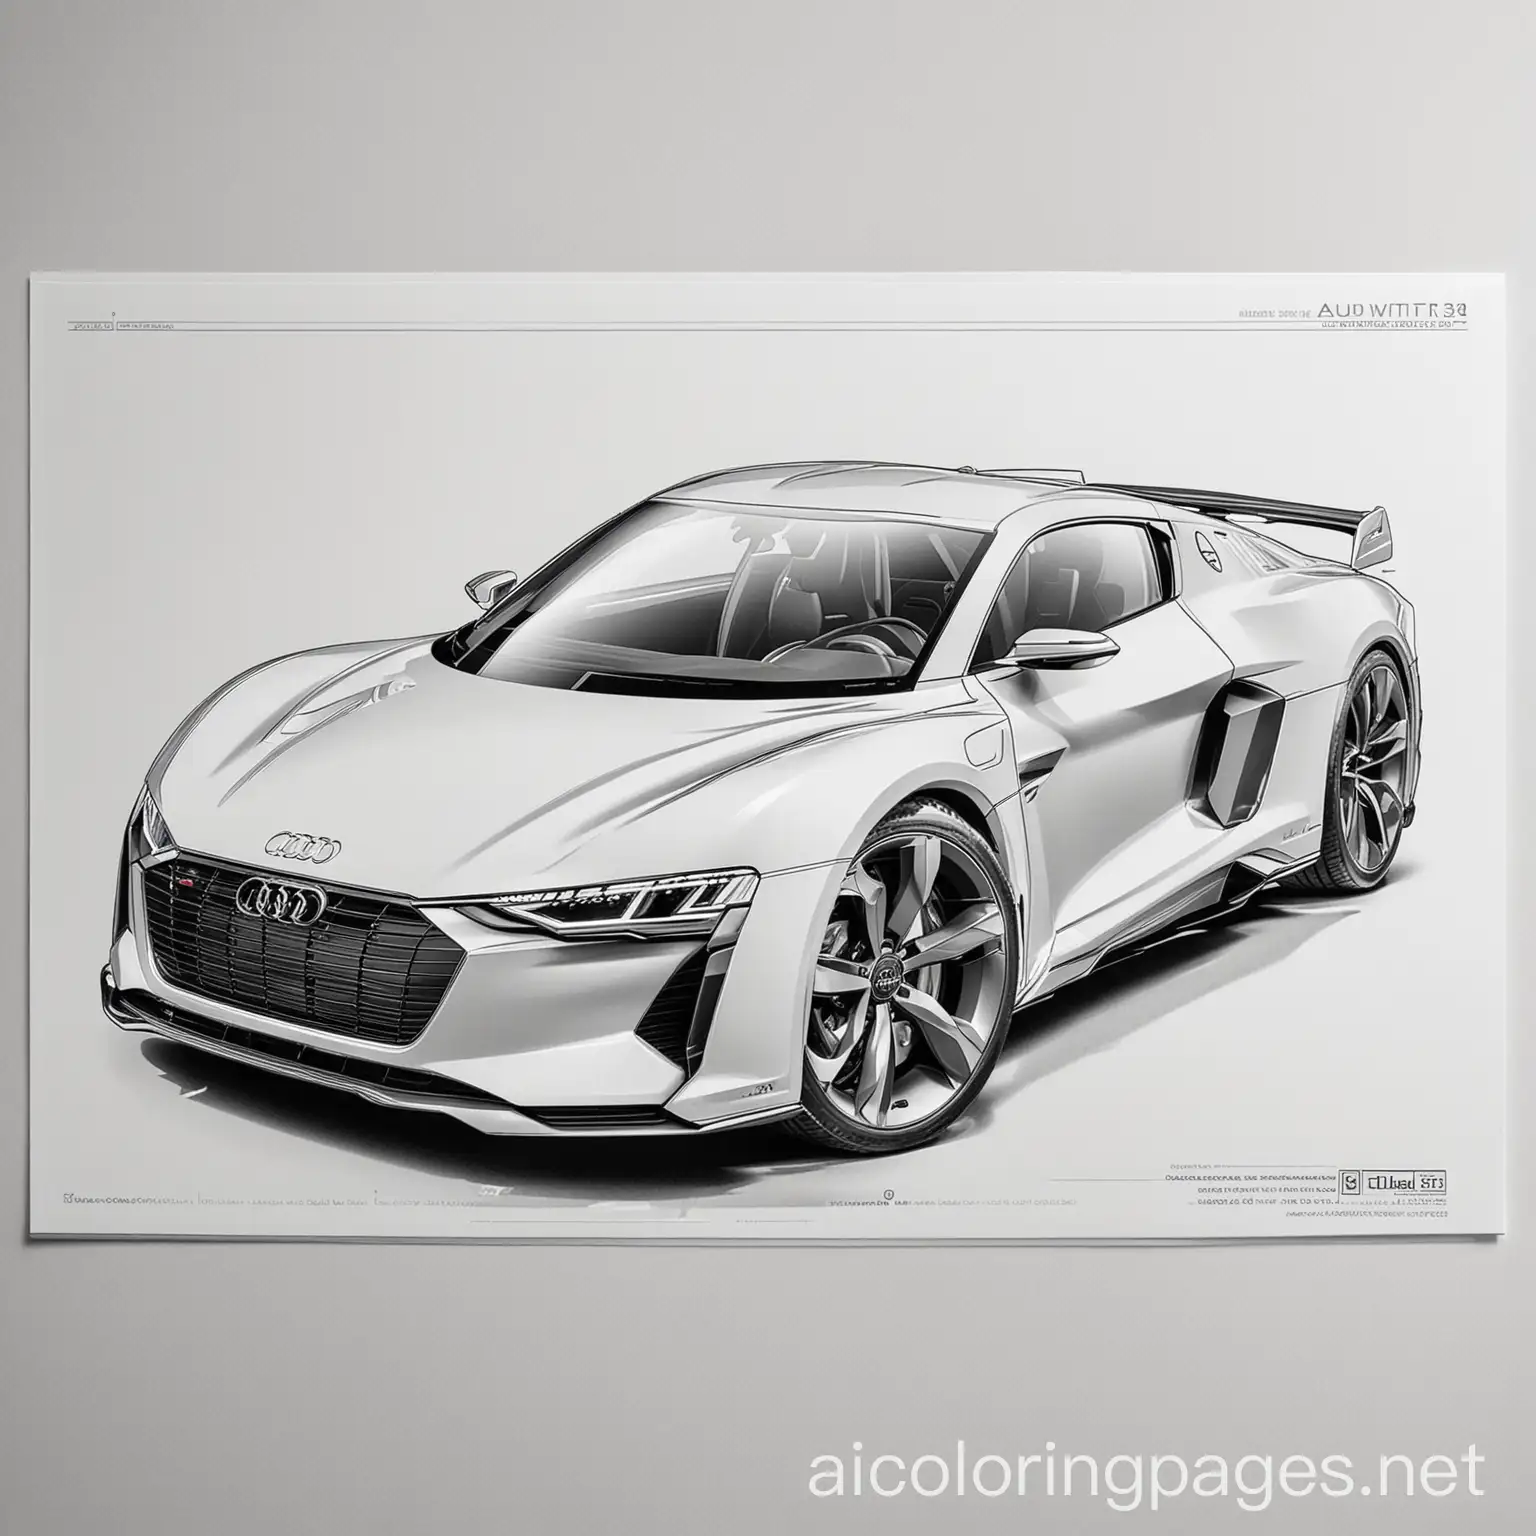 Audi PB18 E-Tron Electric half page real half-page coloring page, Coloring Page, black and white, line art, white background, Simplicity, Ample White Space. The background of the coloring page is plain white to make it easy for young children to color within the lines. The outlines of all the subjects are easy to distinguish, making it simple for kids to color without too much difficulty